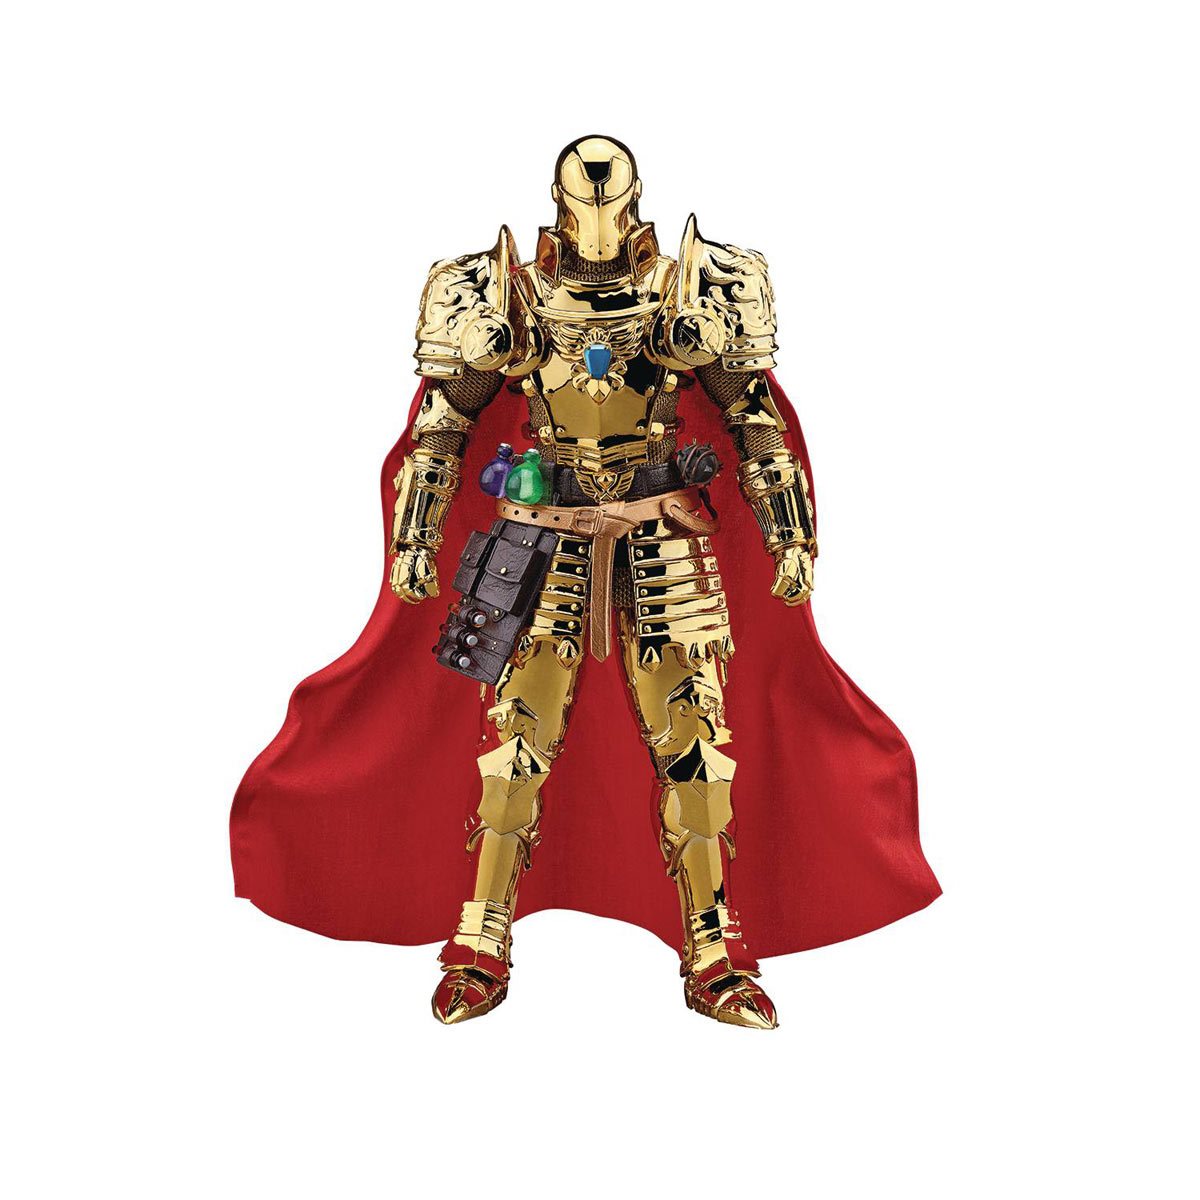 Create a detailed and dynamic image of Iron Man's black and gold suit